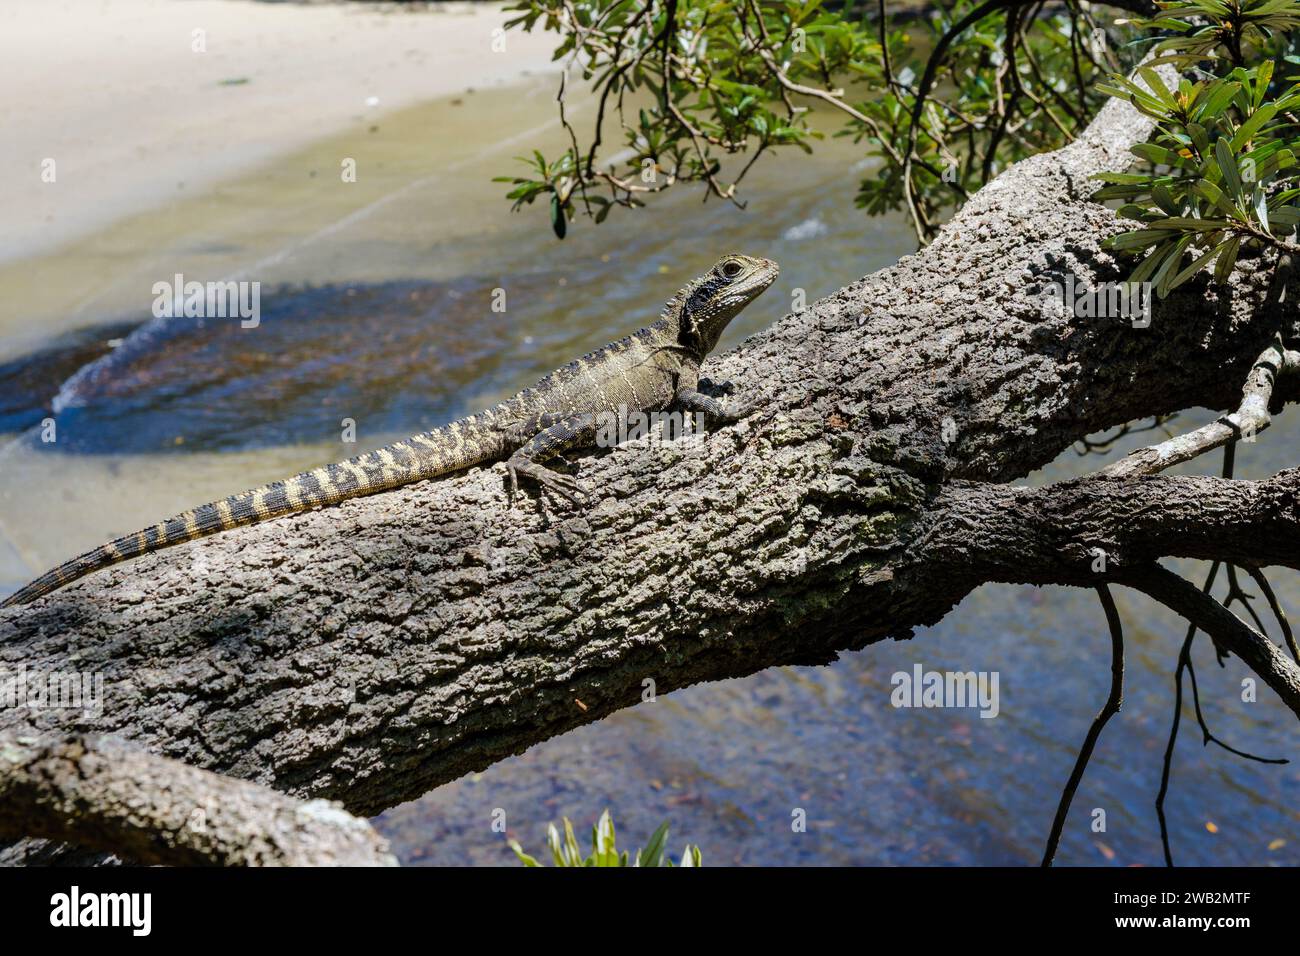 An Australian water dragon basking on a tree trunk at Parsley Bay, Vaucluse, Sydney, New South Wales, Australia Stock Photo